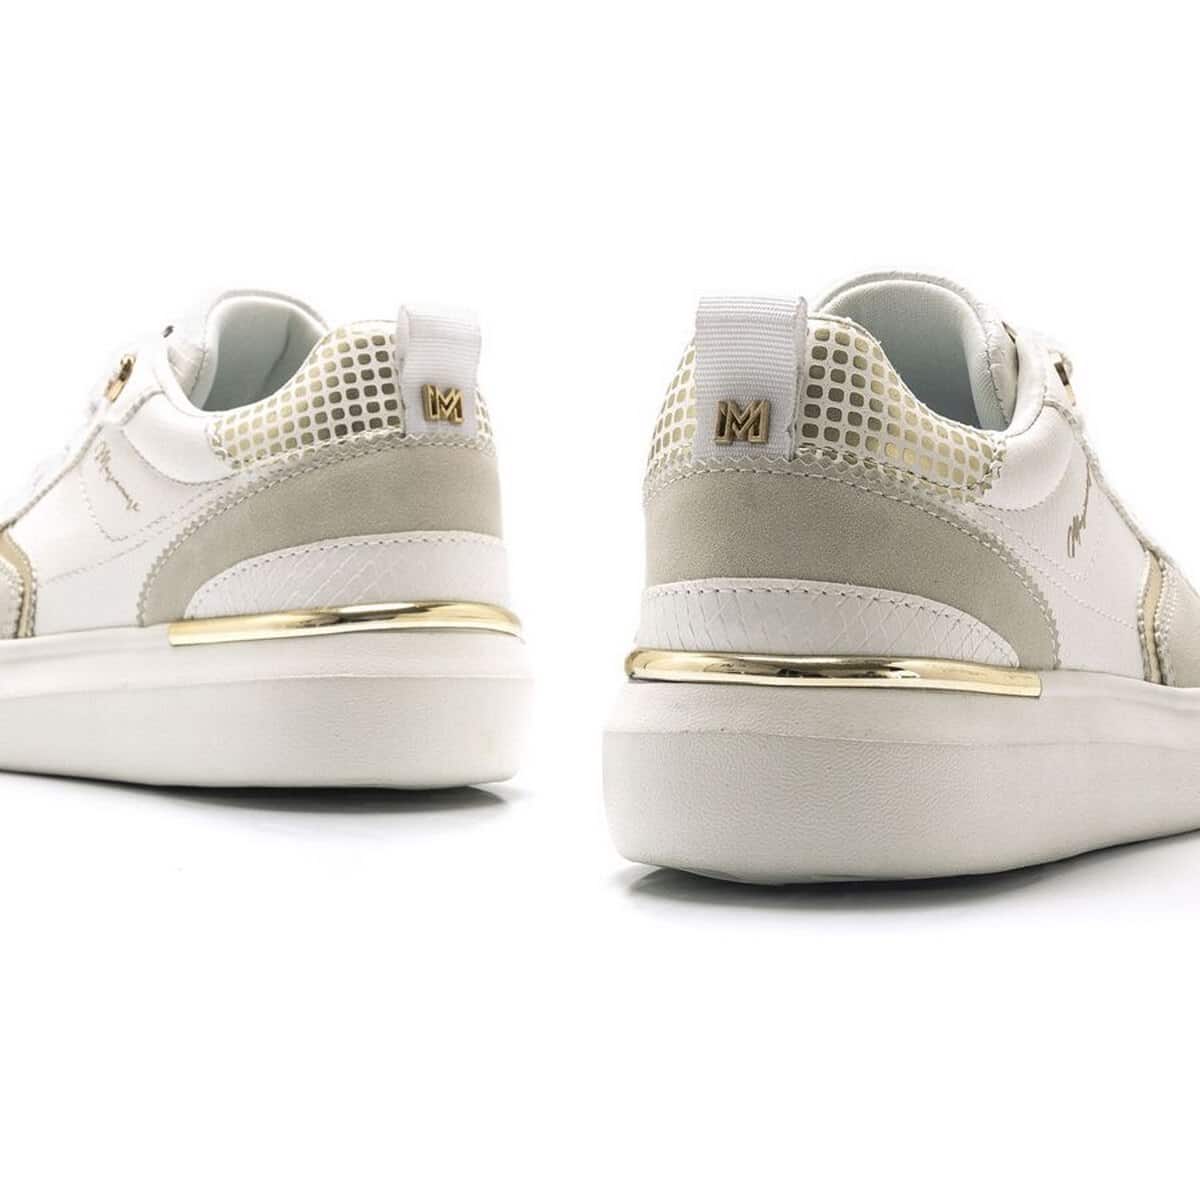 SNEAKERS WITH GOLDEN DETAILS MARIAMARE 63330 WHITE